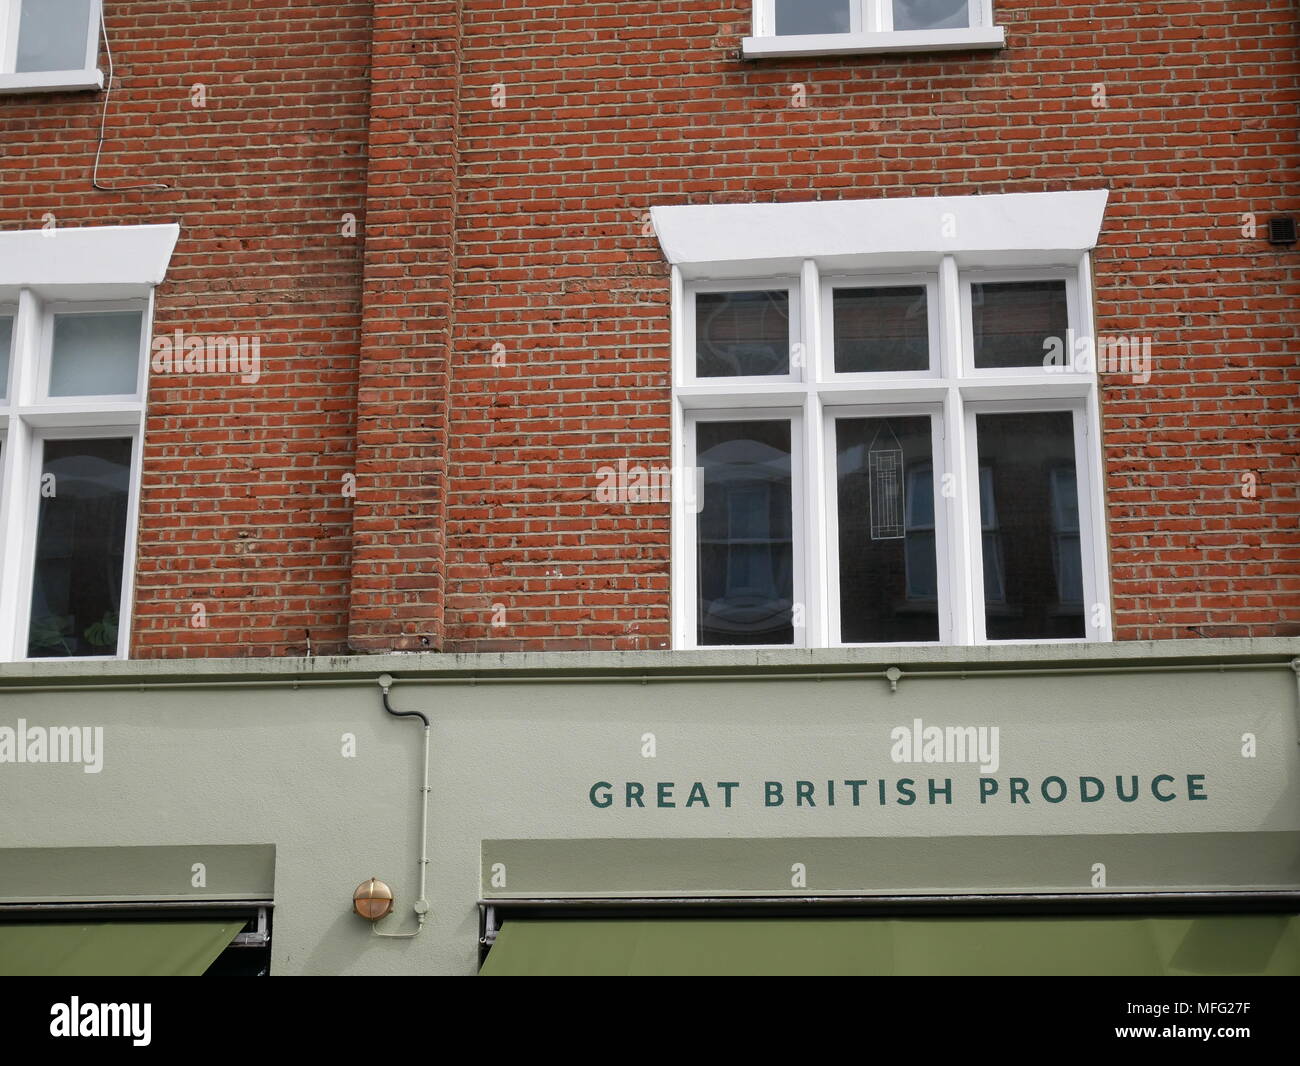 Restaurant sign referencing British produce in London, UK. Stock Photo